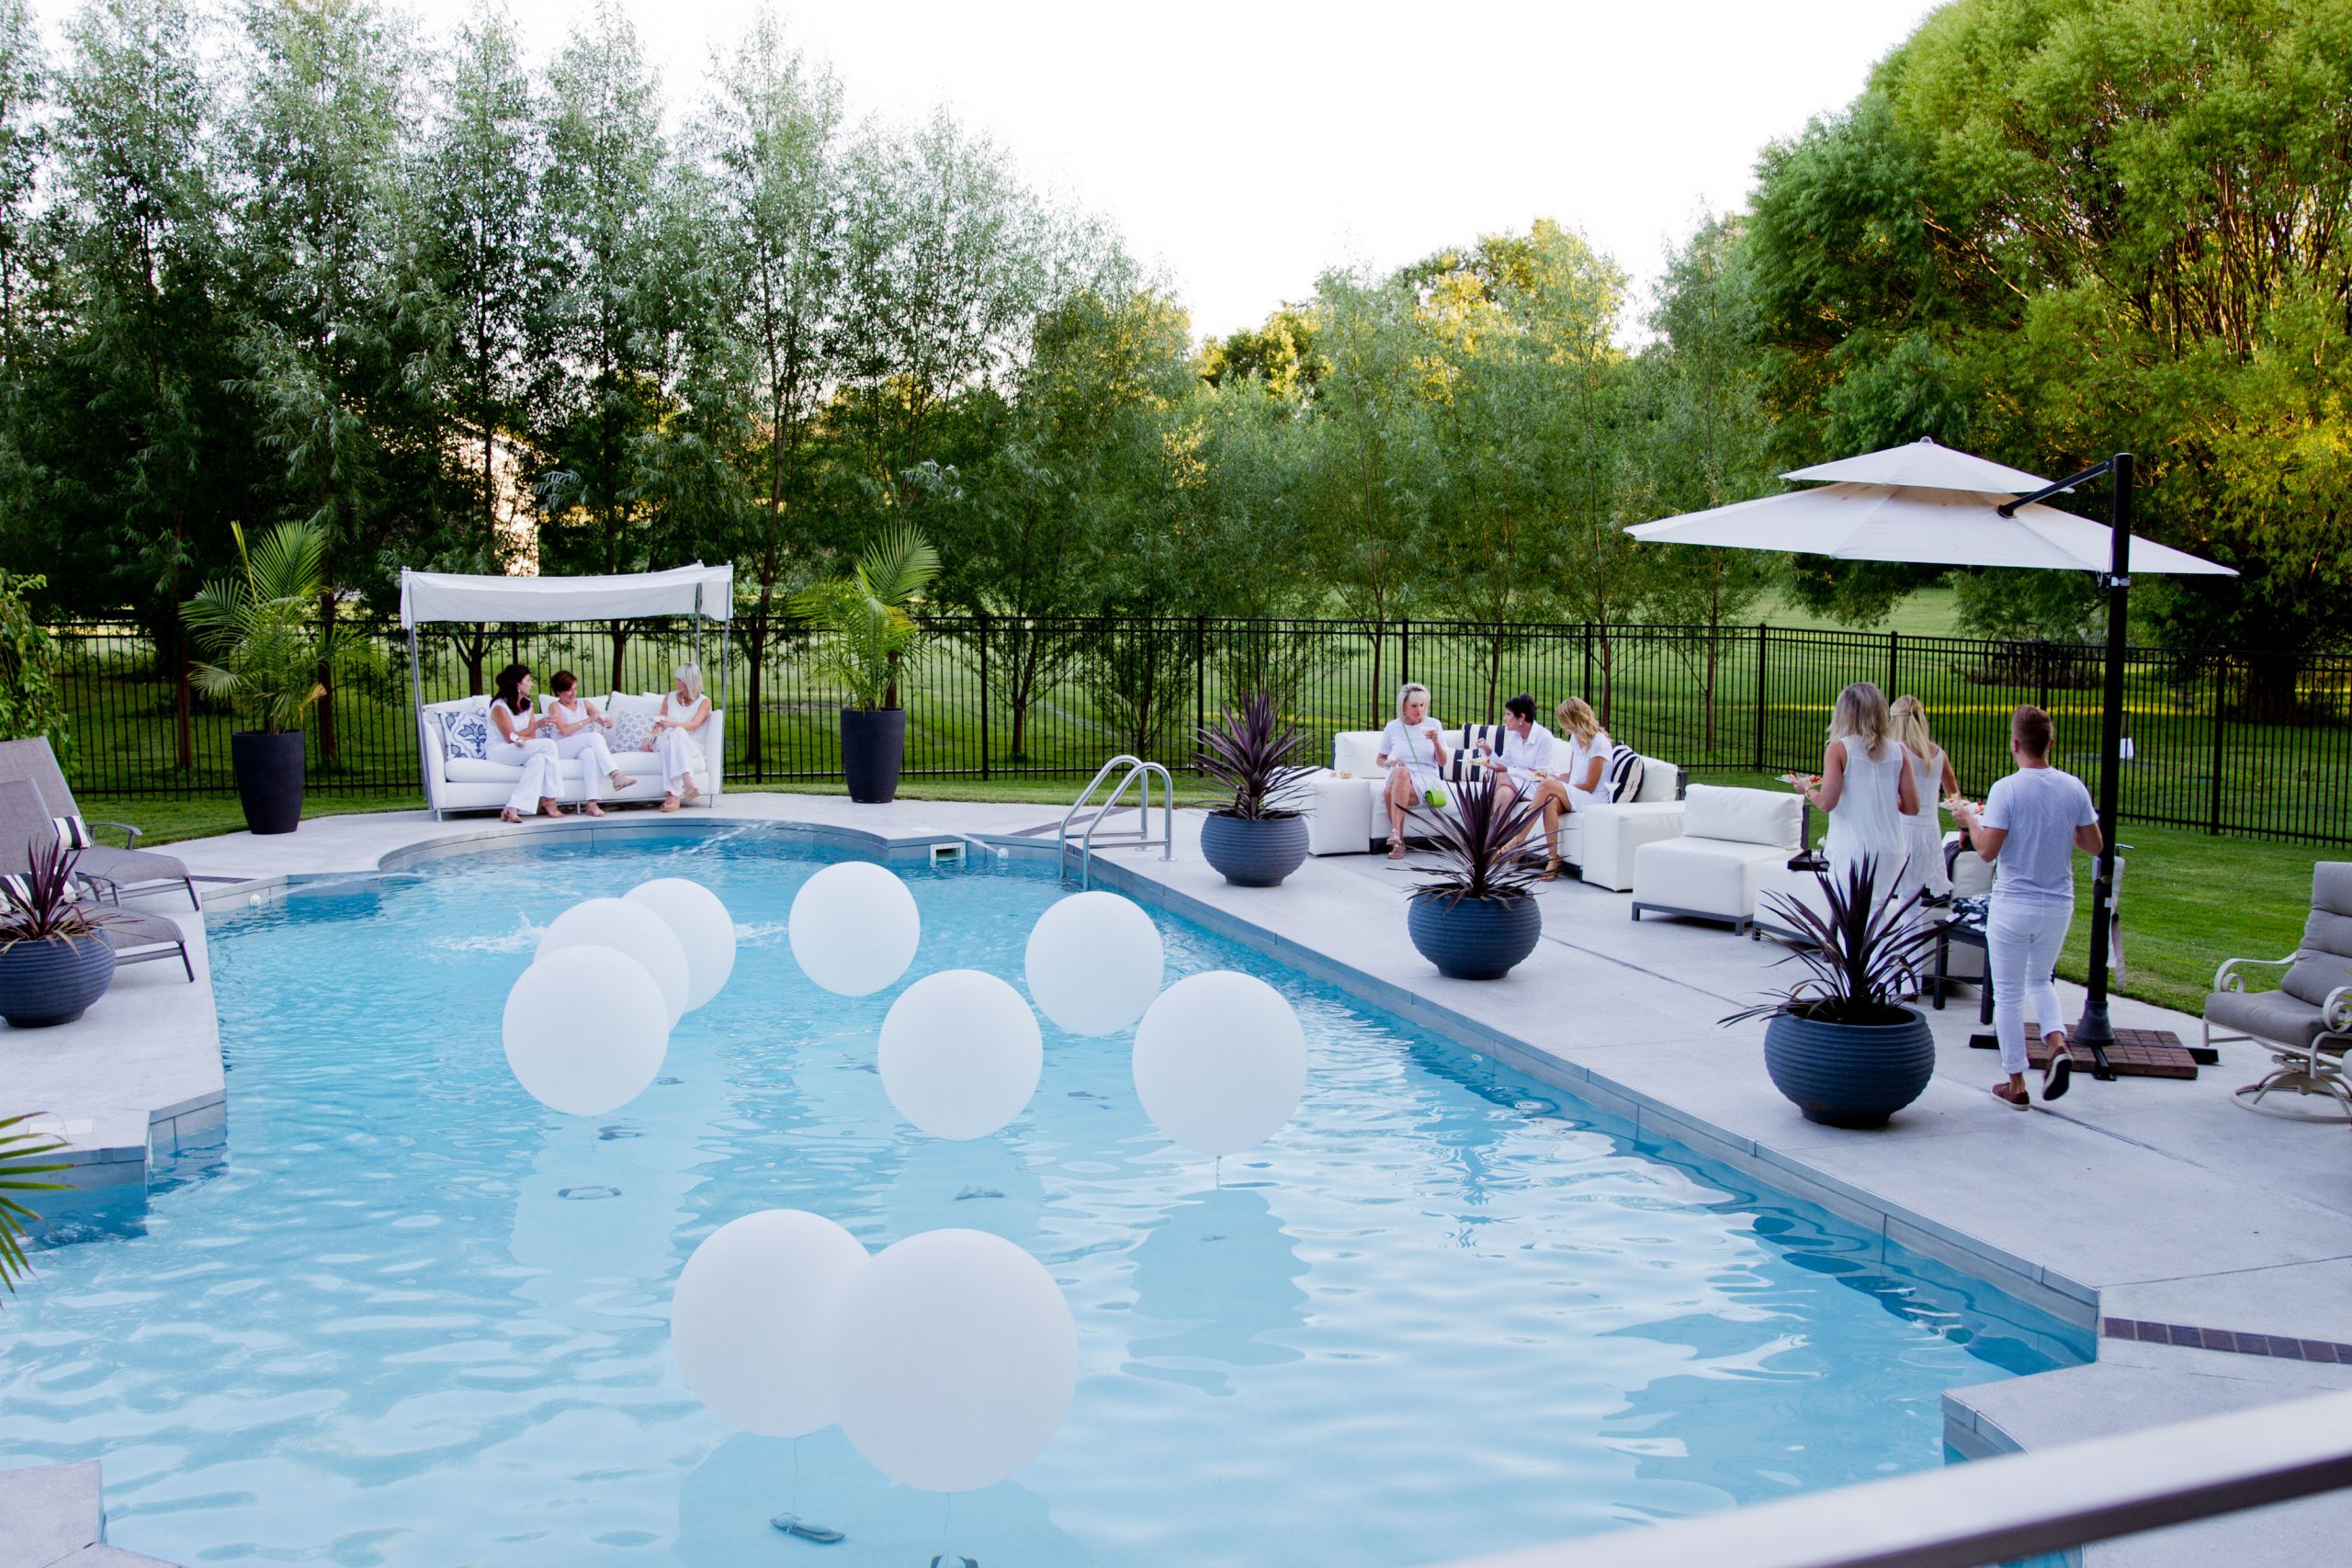 All White Pool Party Ideas
 A White Party to Remember